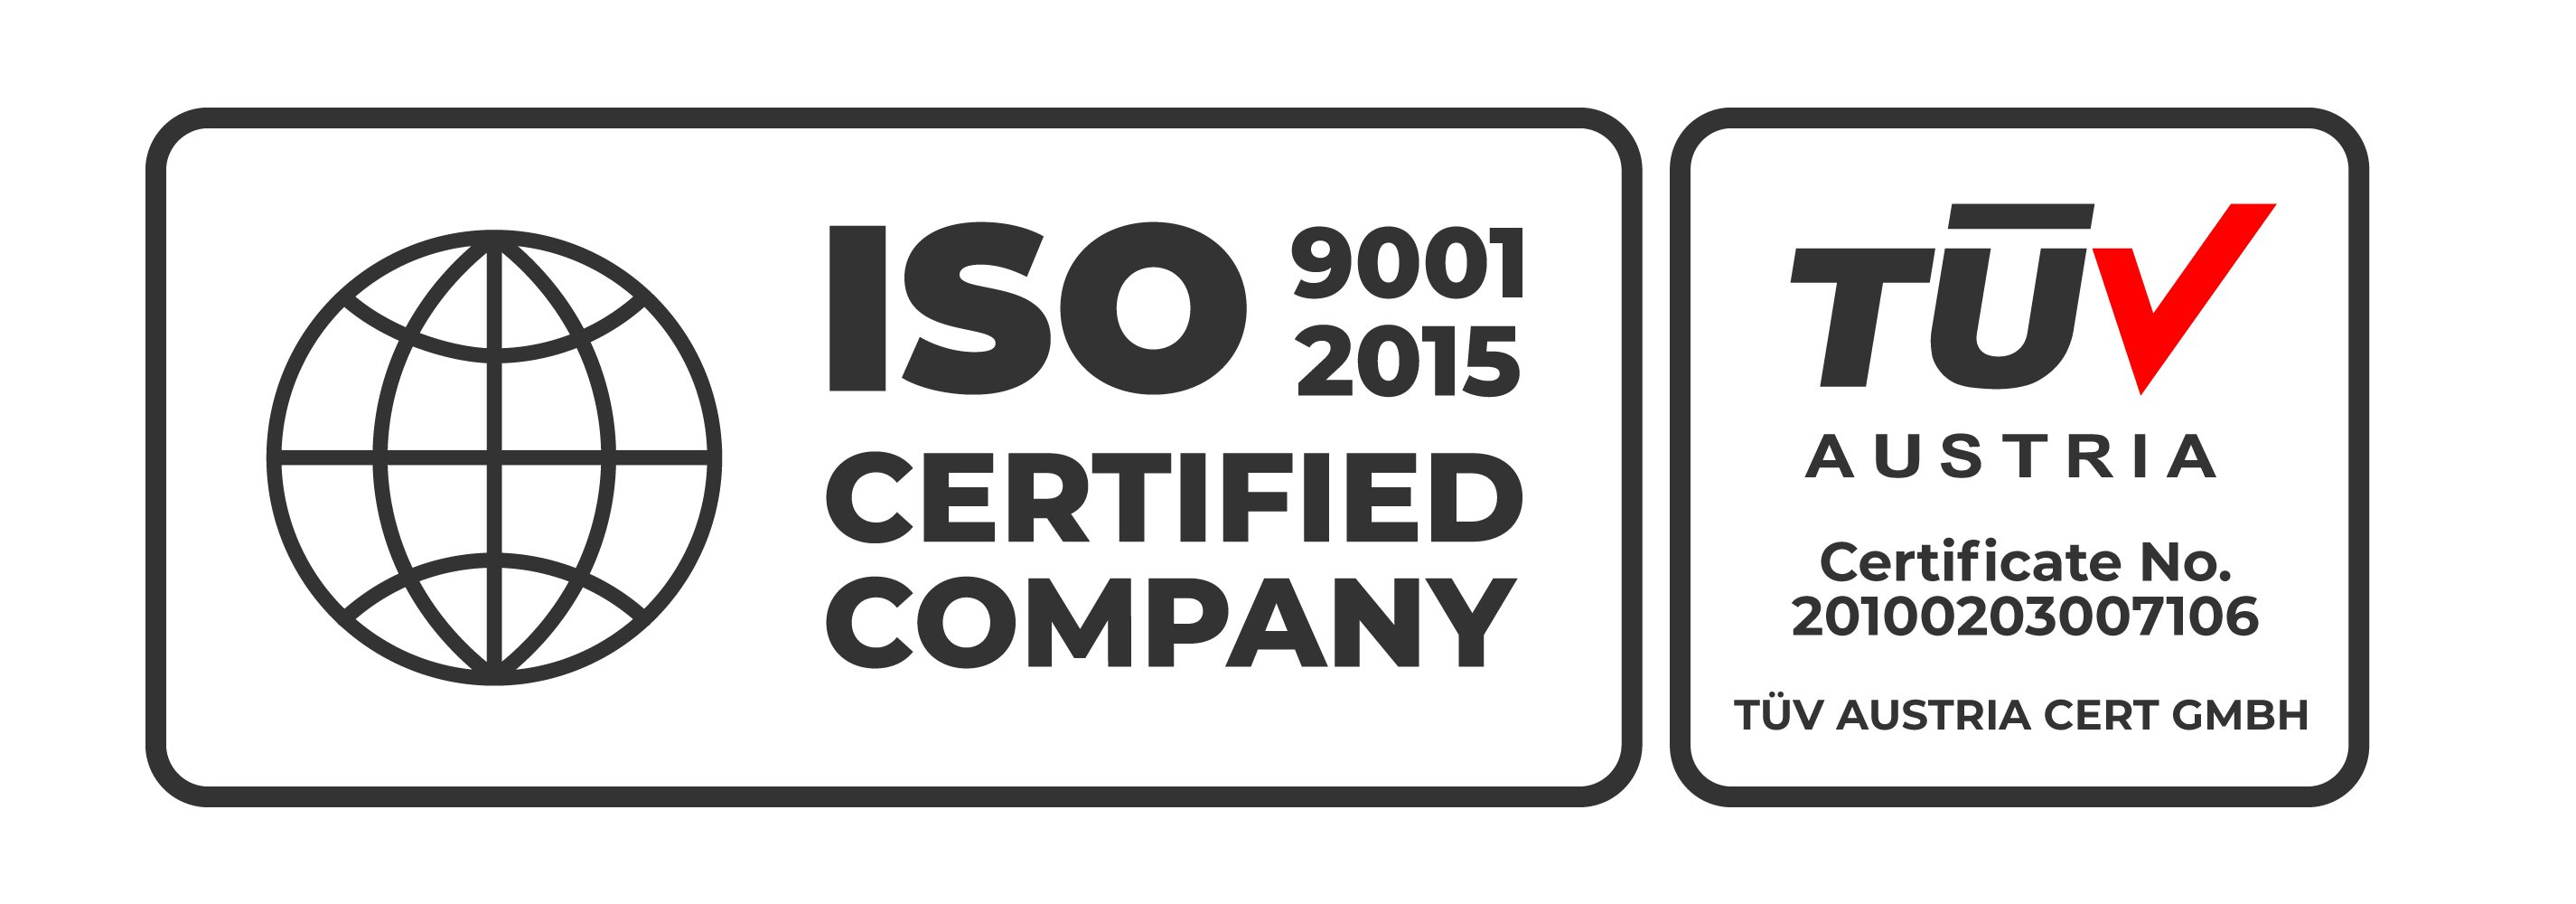 NJF ISO 9001:2015 Certified Company